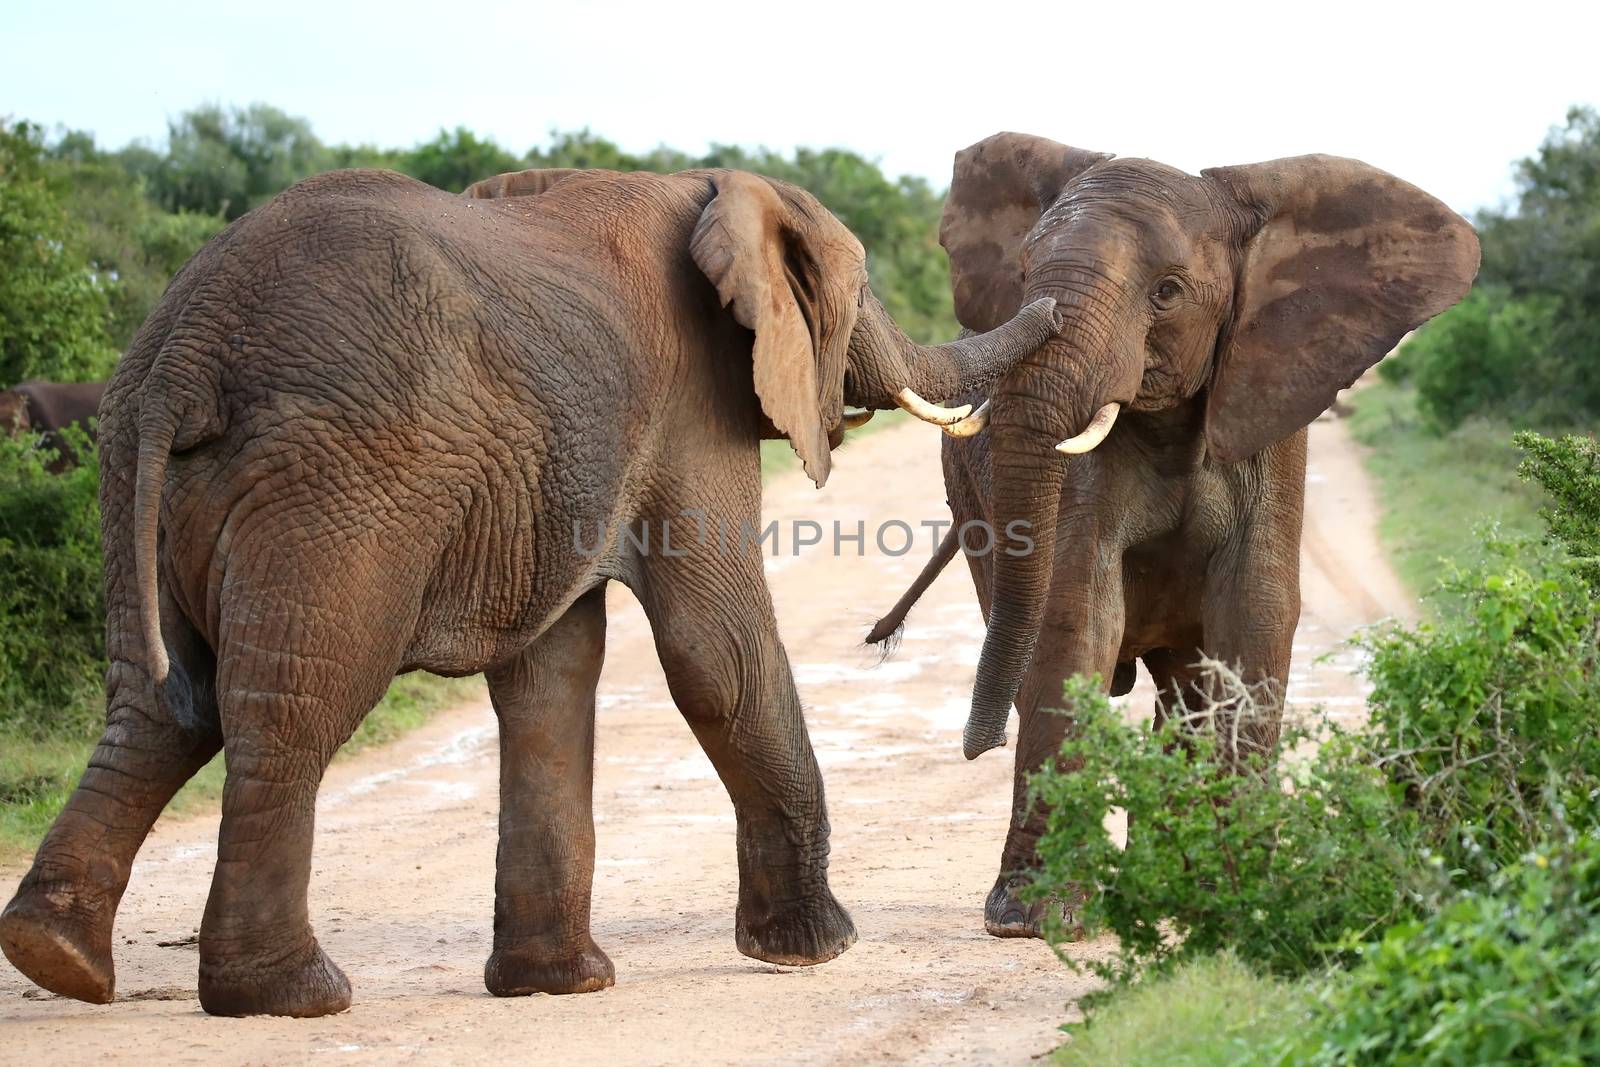 Two male African elephants trying assert their dominance